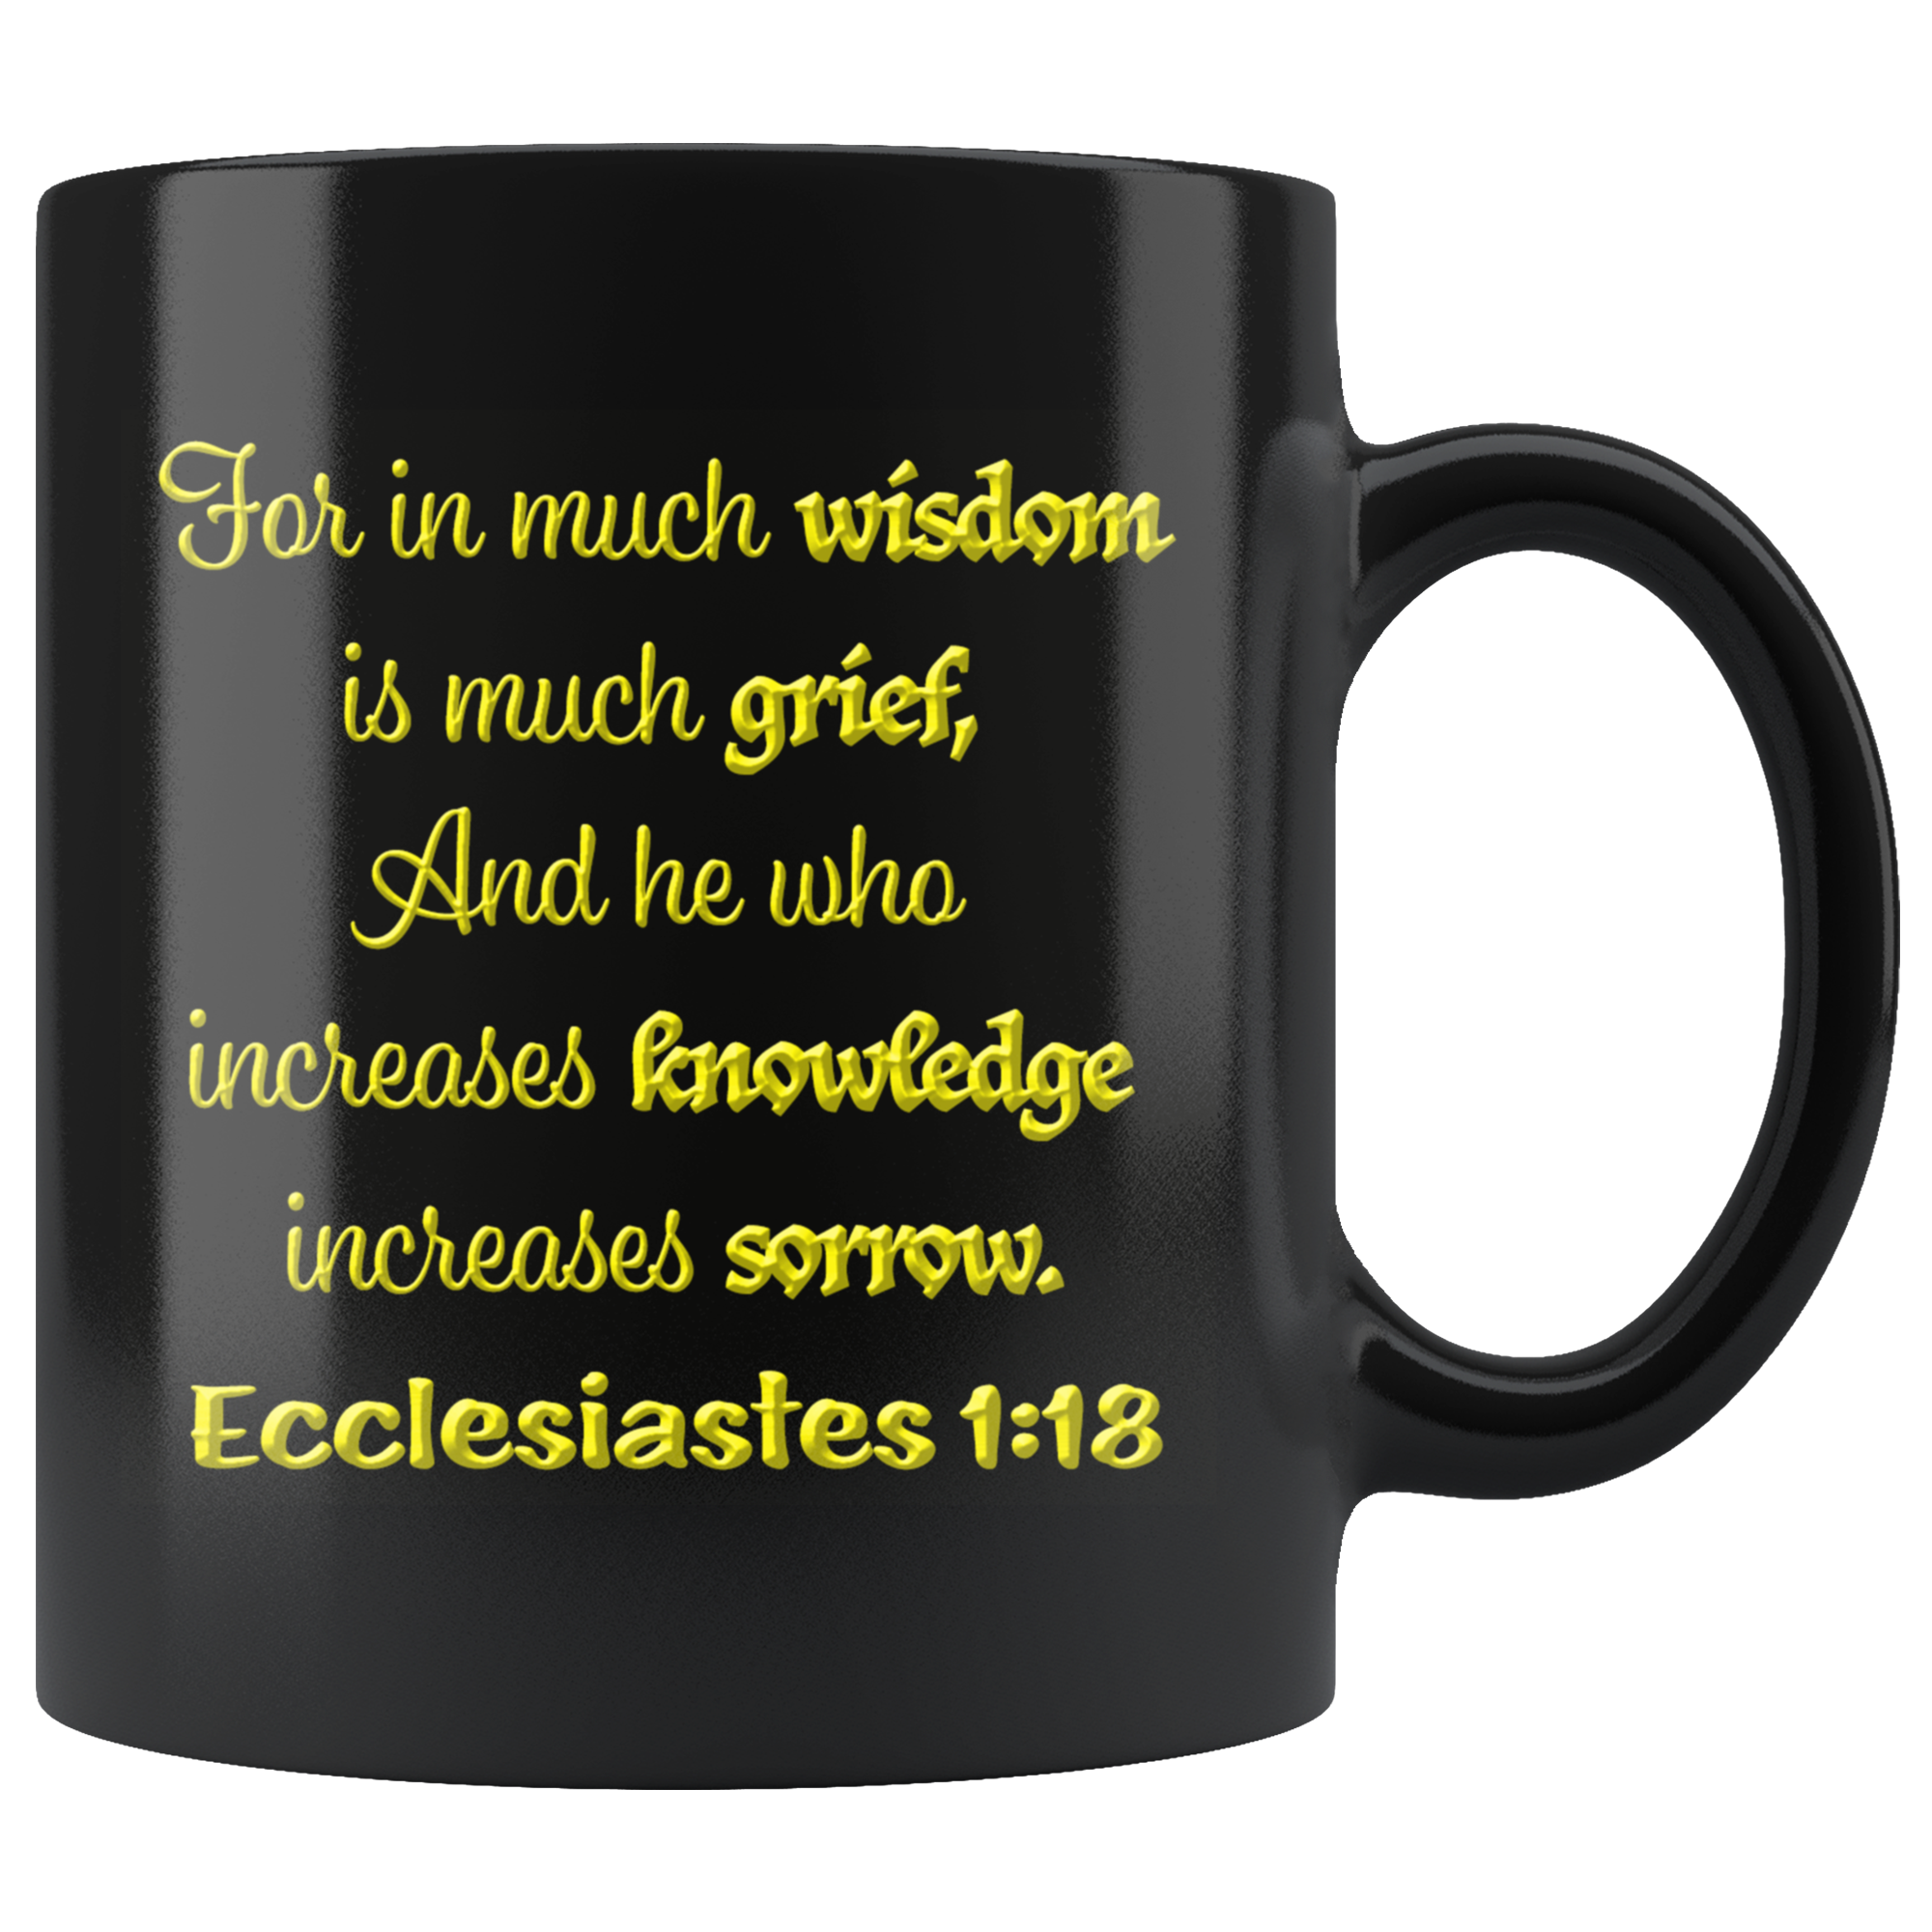 FOR IN MUCH WISDOM -IS MUCH GRIEF -Ecclesiastes 1:18